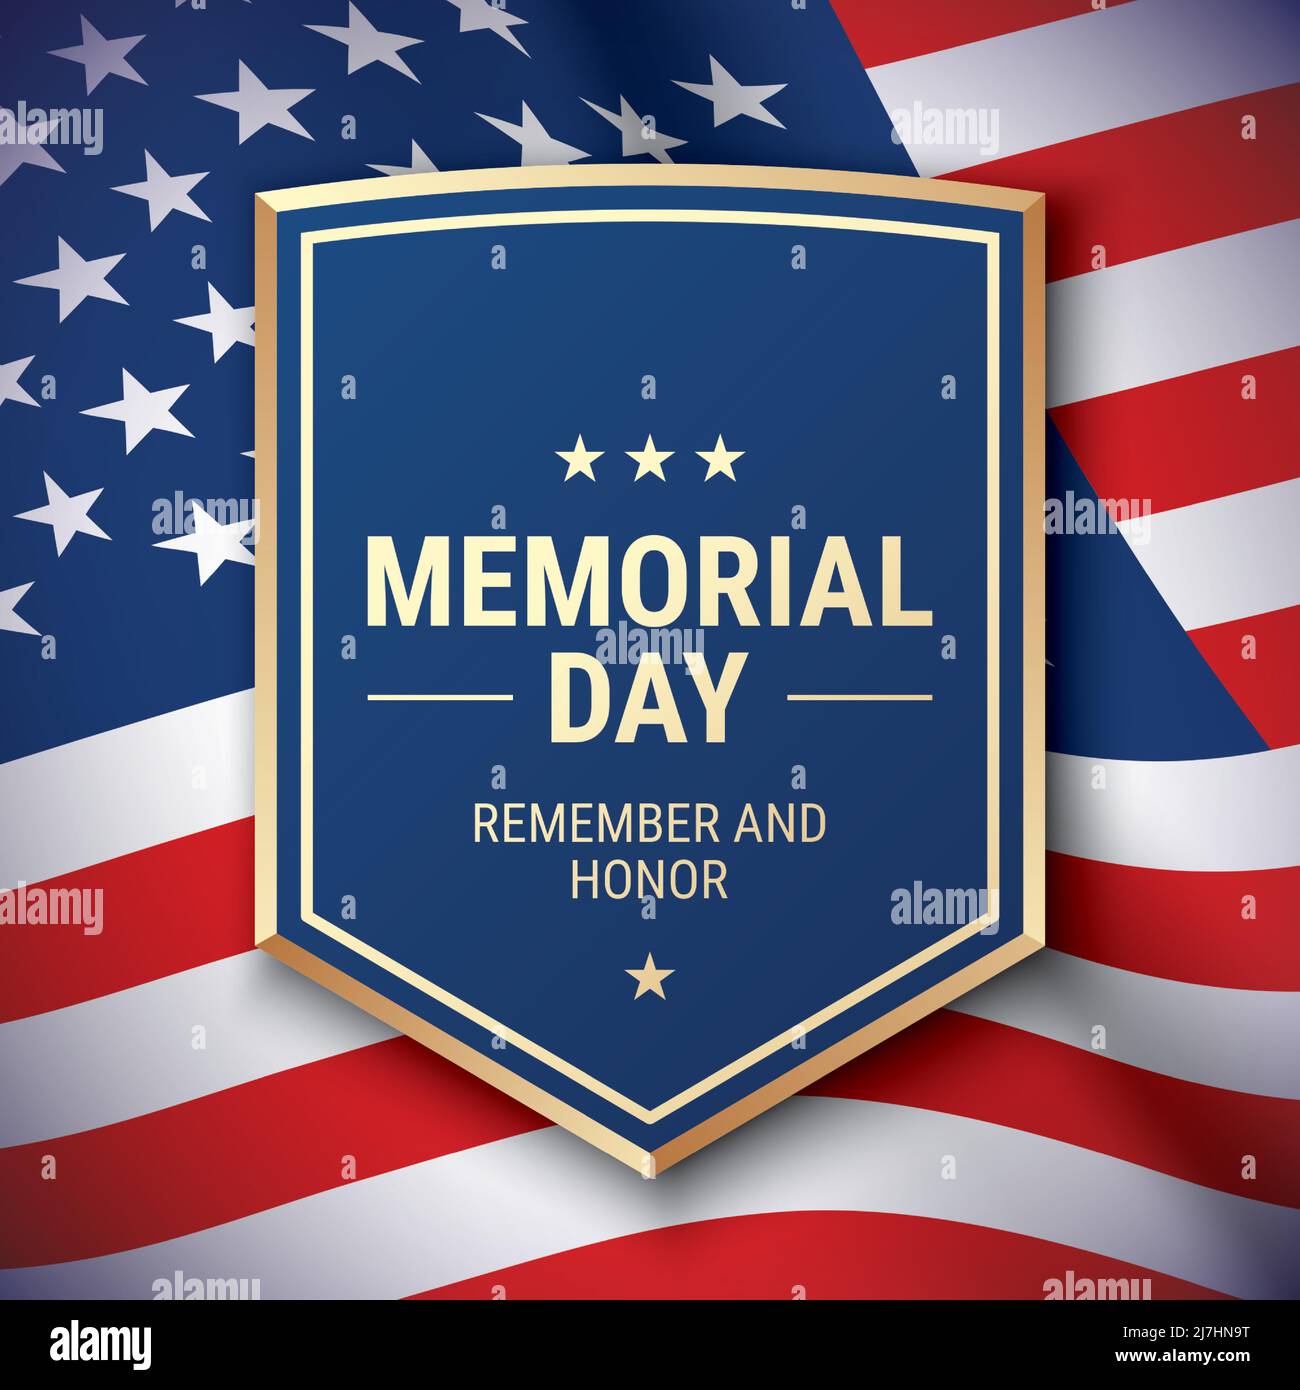 Memorial Day postcard vector design, with greeting text and shield on a waving USA flag background. Stock Vector